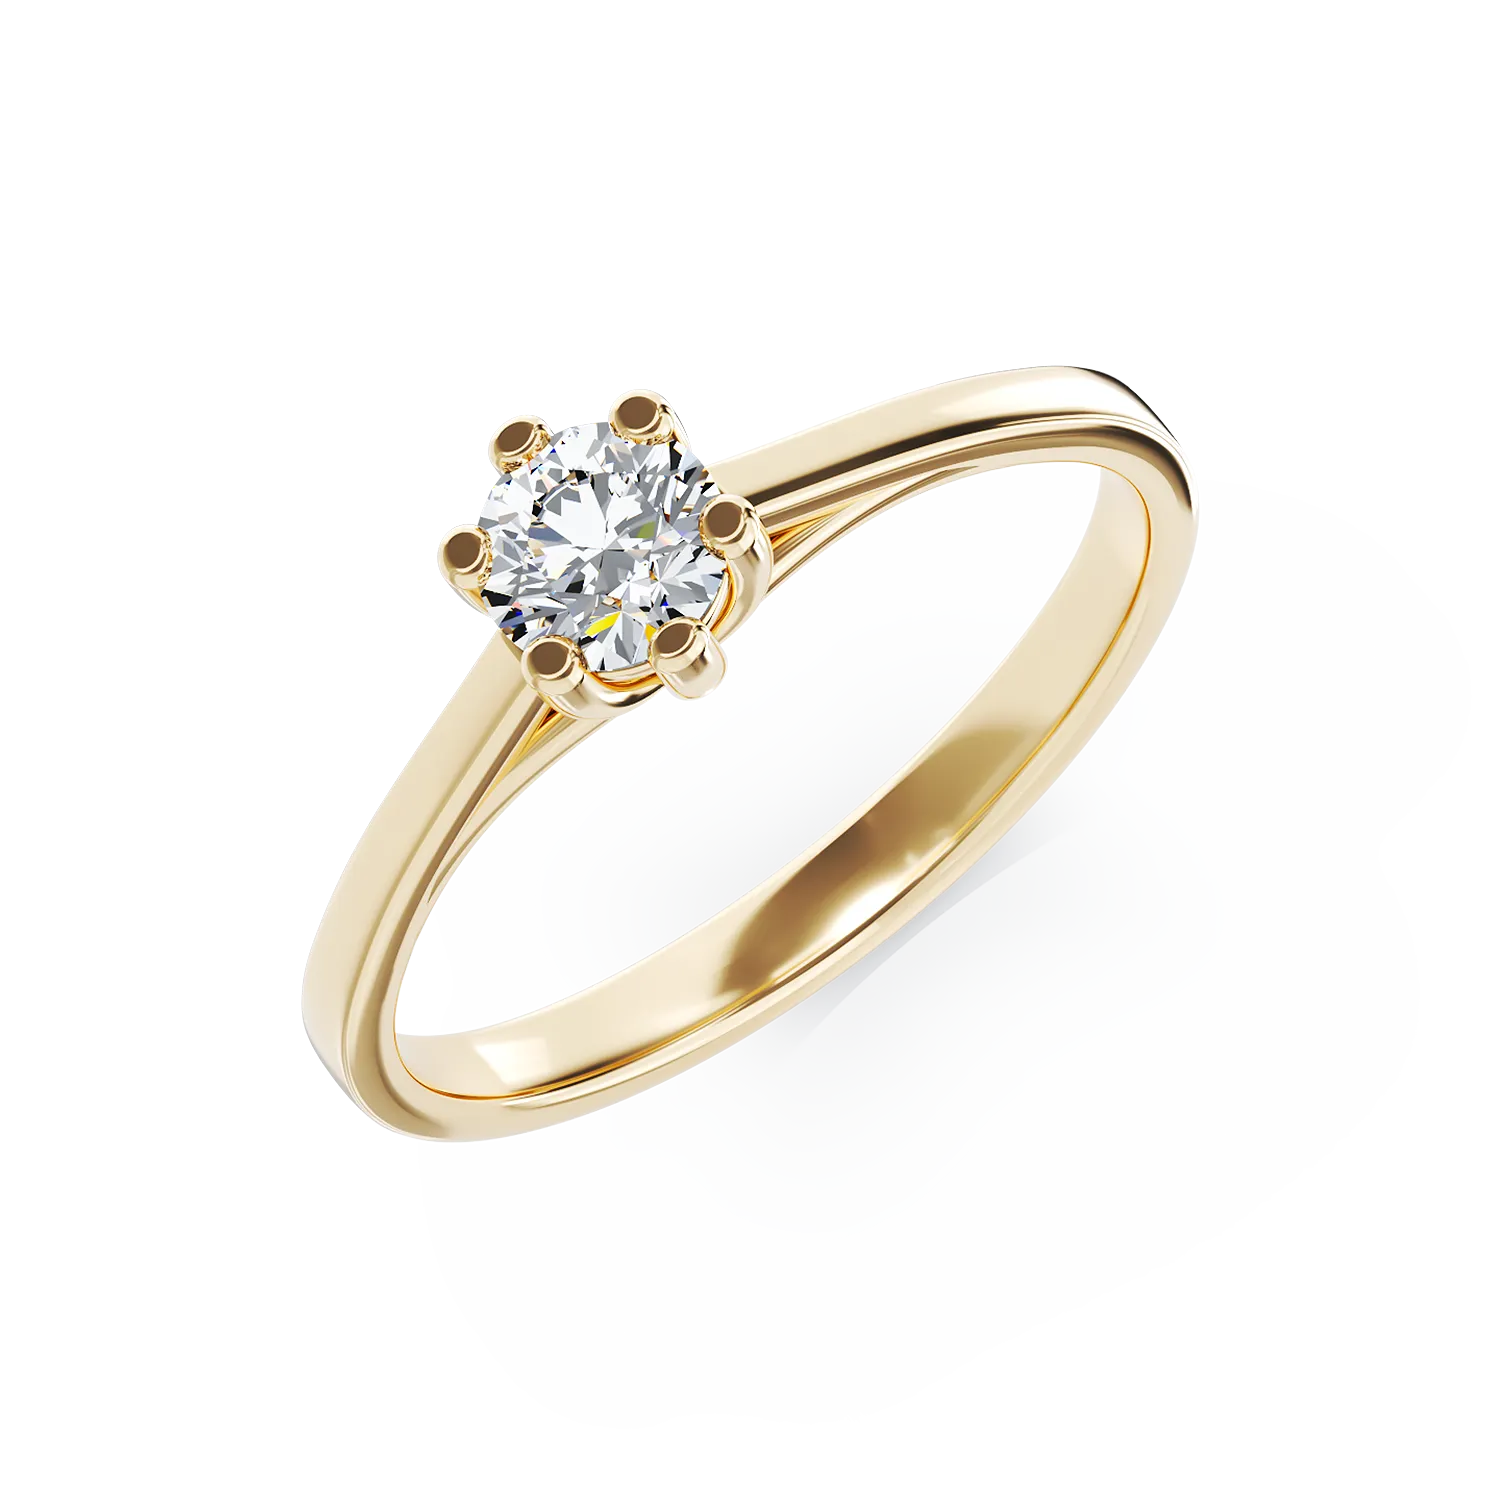 18k yellow gold engagement ring with 0.15ct diamond